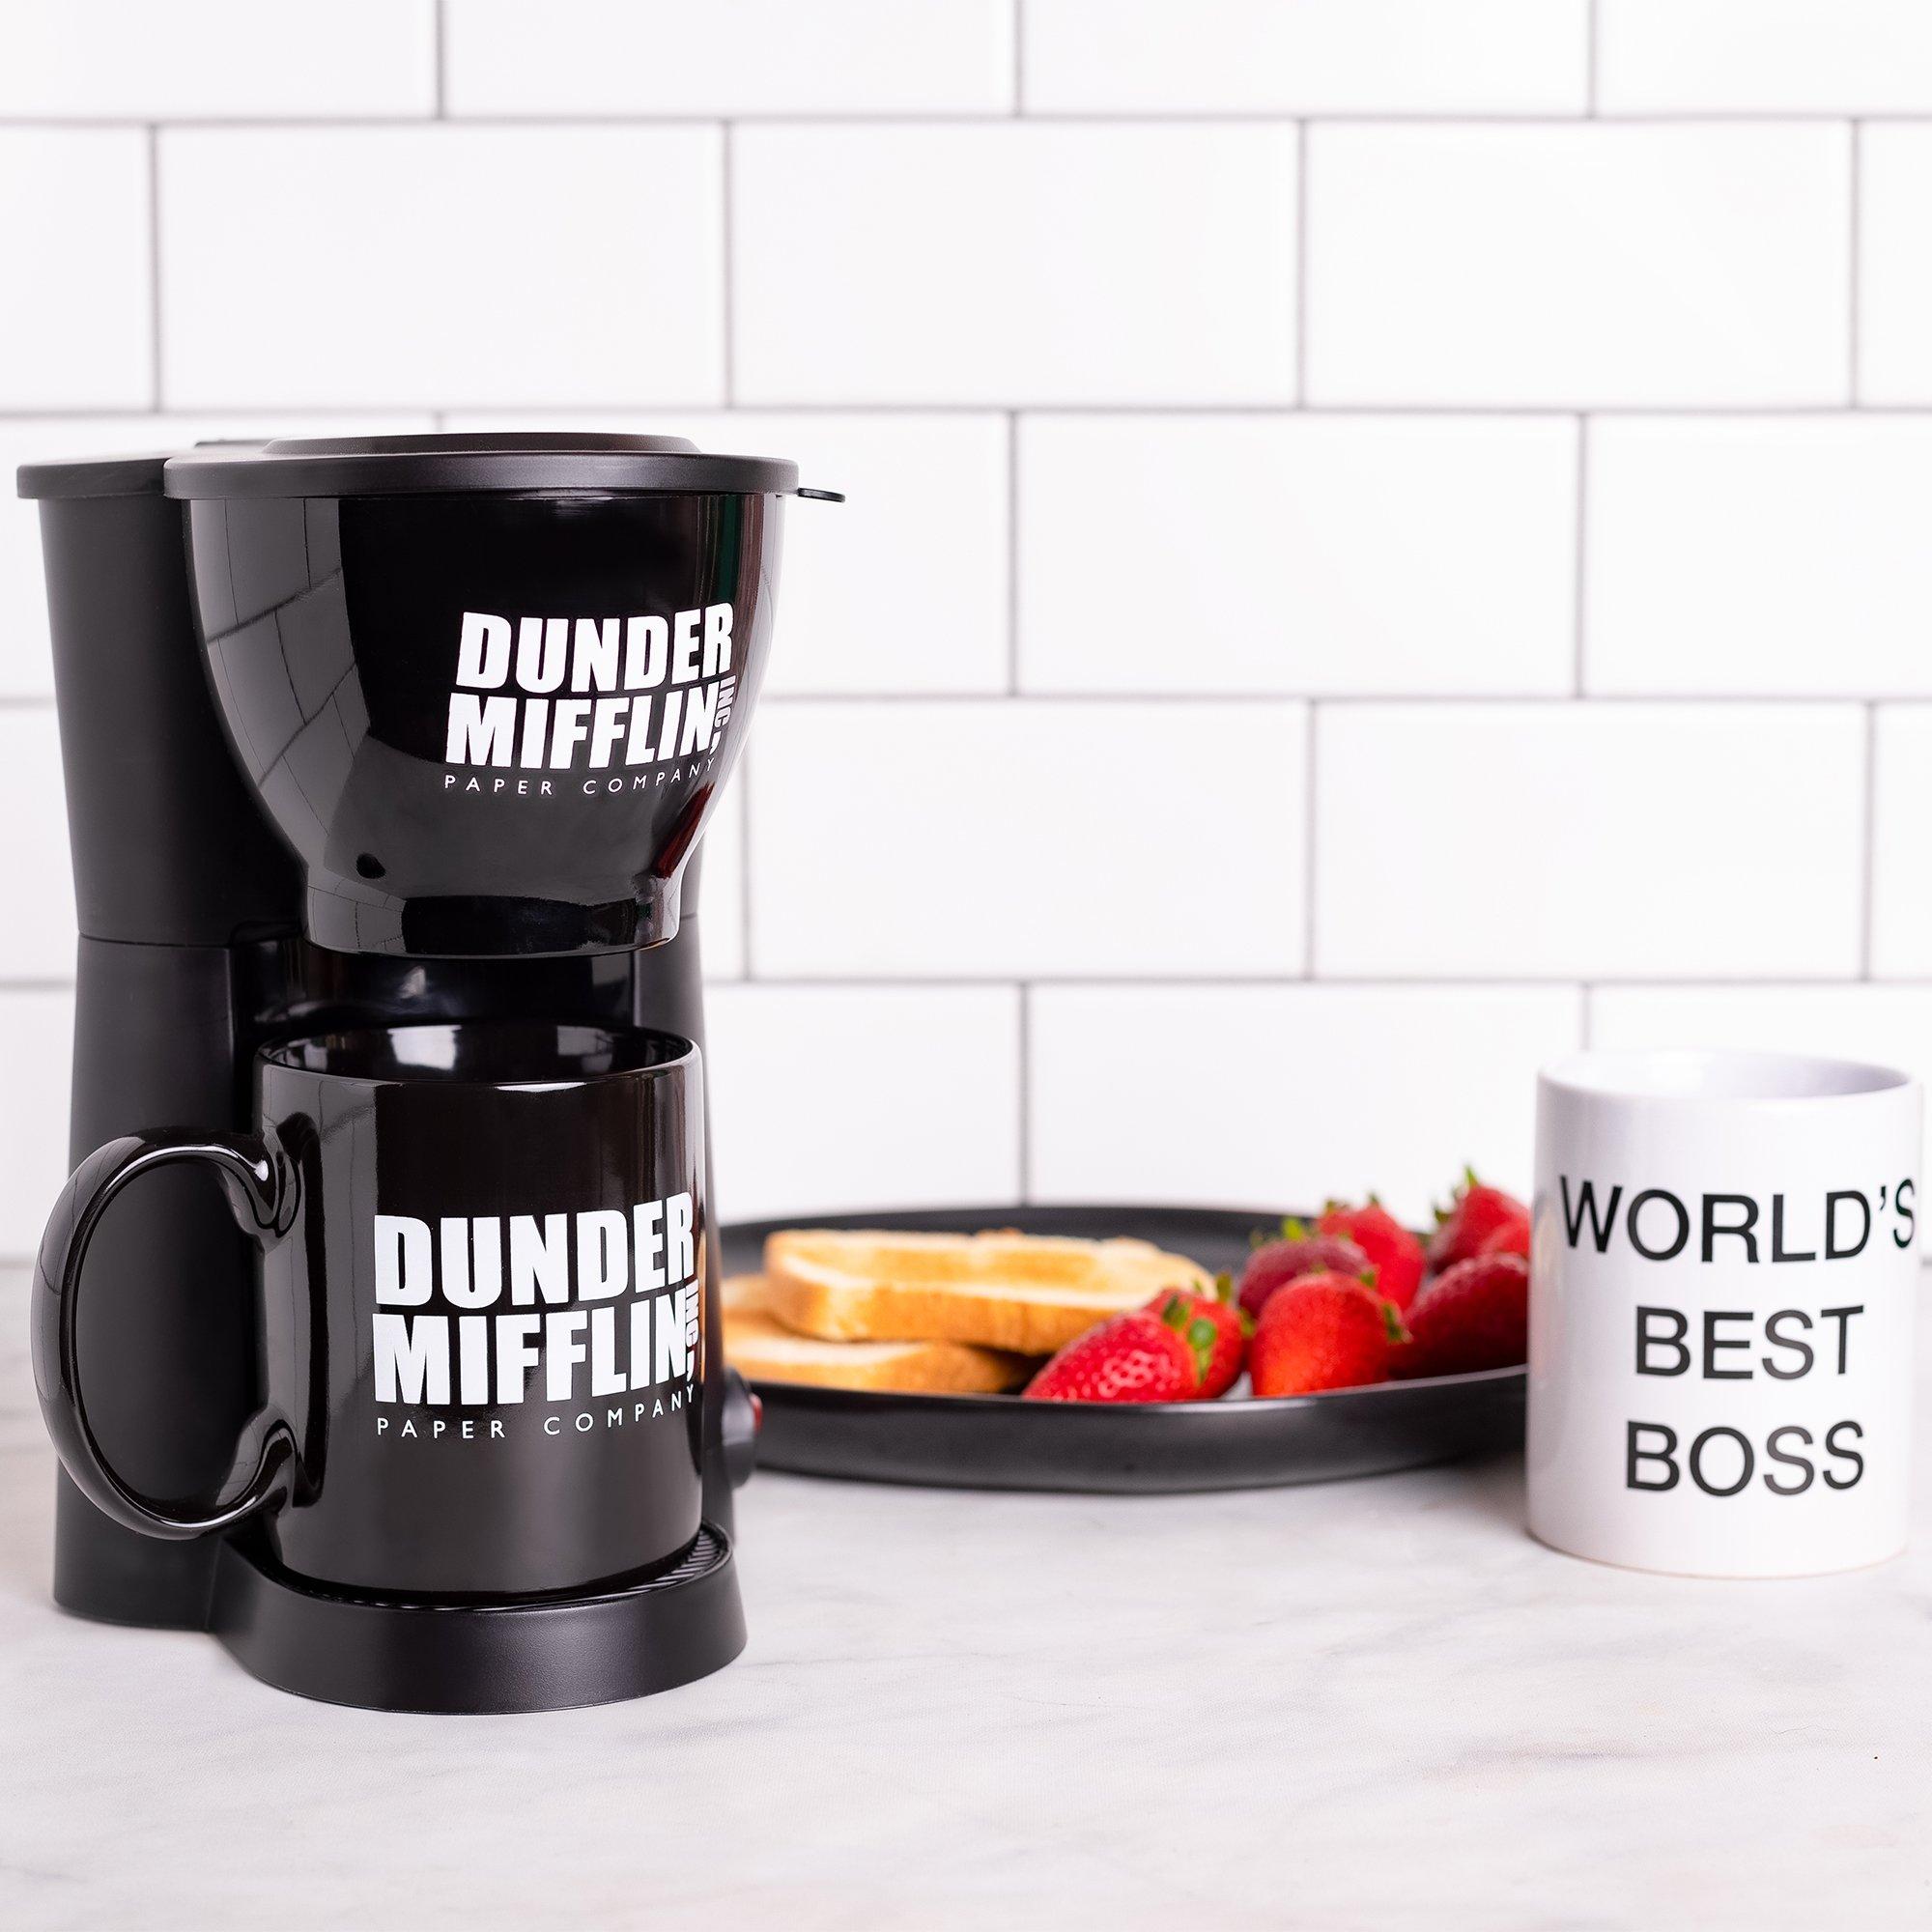 https://media.gamestop.com/i/gamestop/20005582_ALT03/The-Office-Single-Cup-Coffee-Maker-Gift-Set-with-2-Mugs?$pdp$